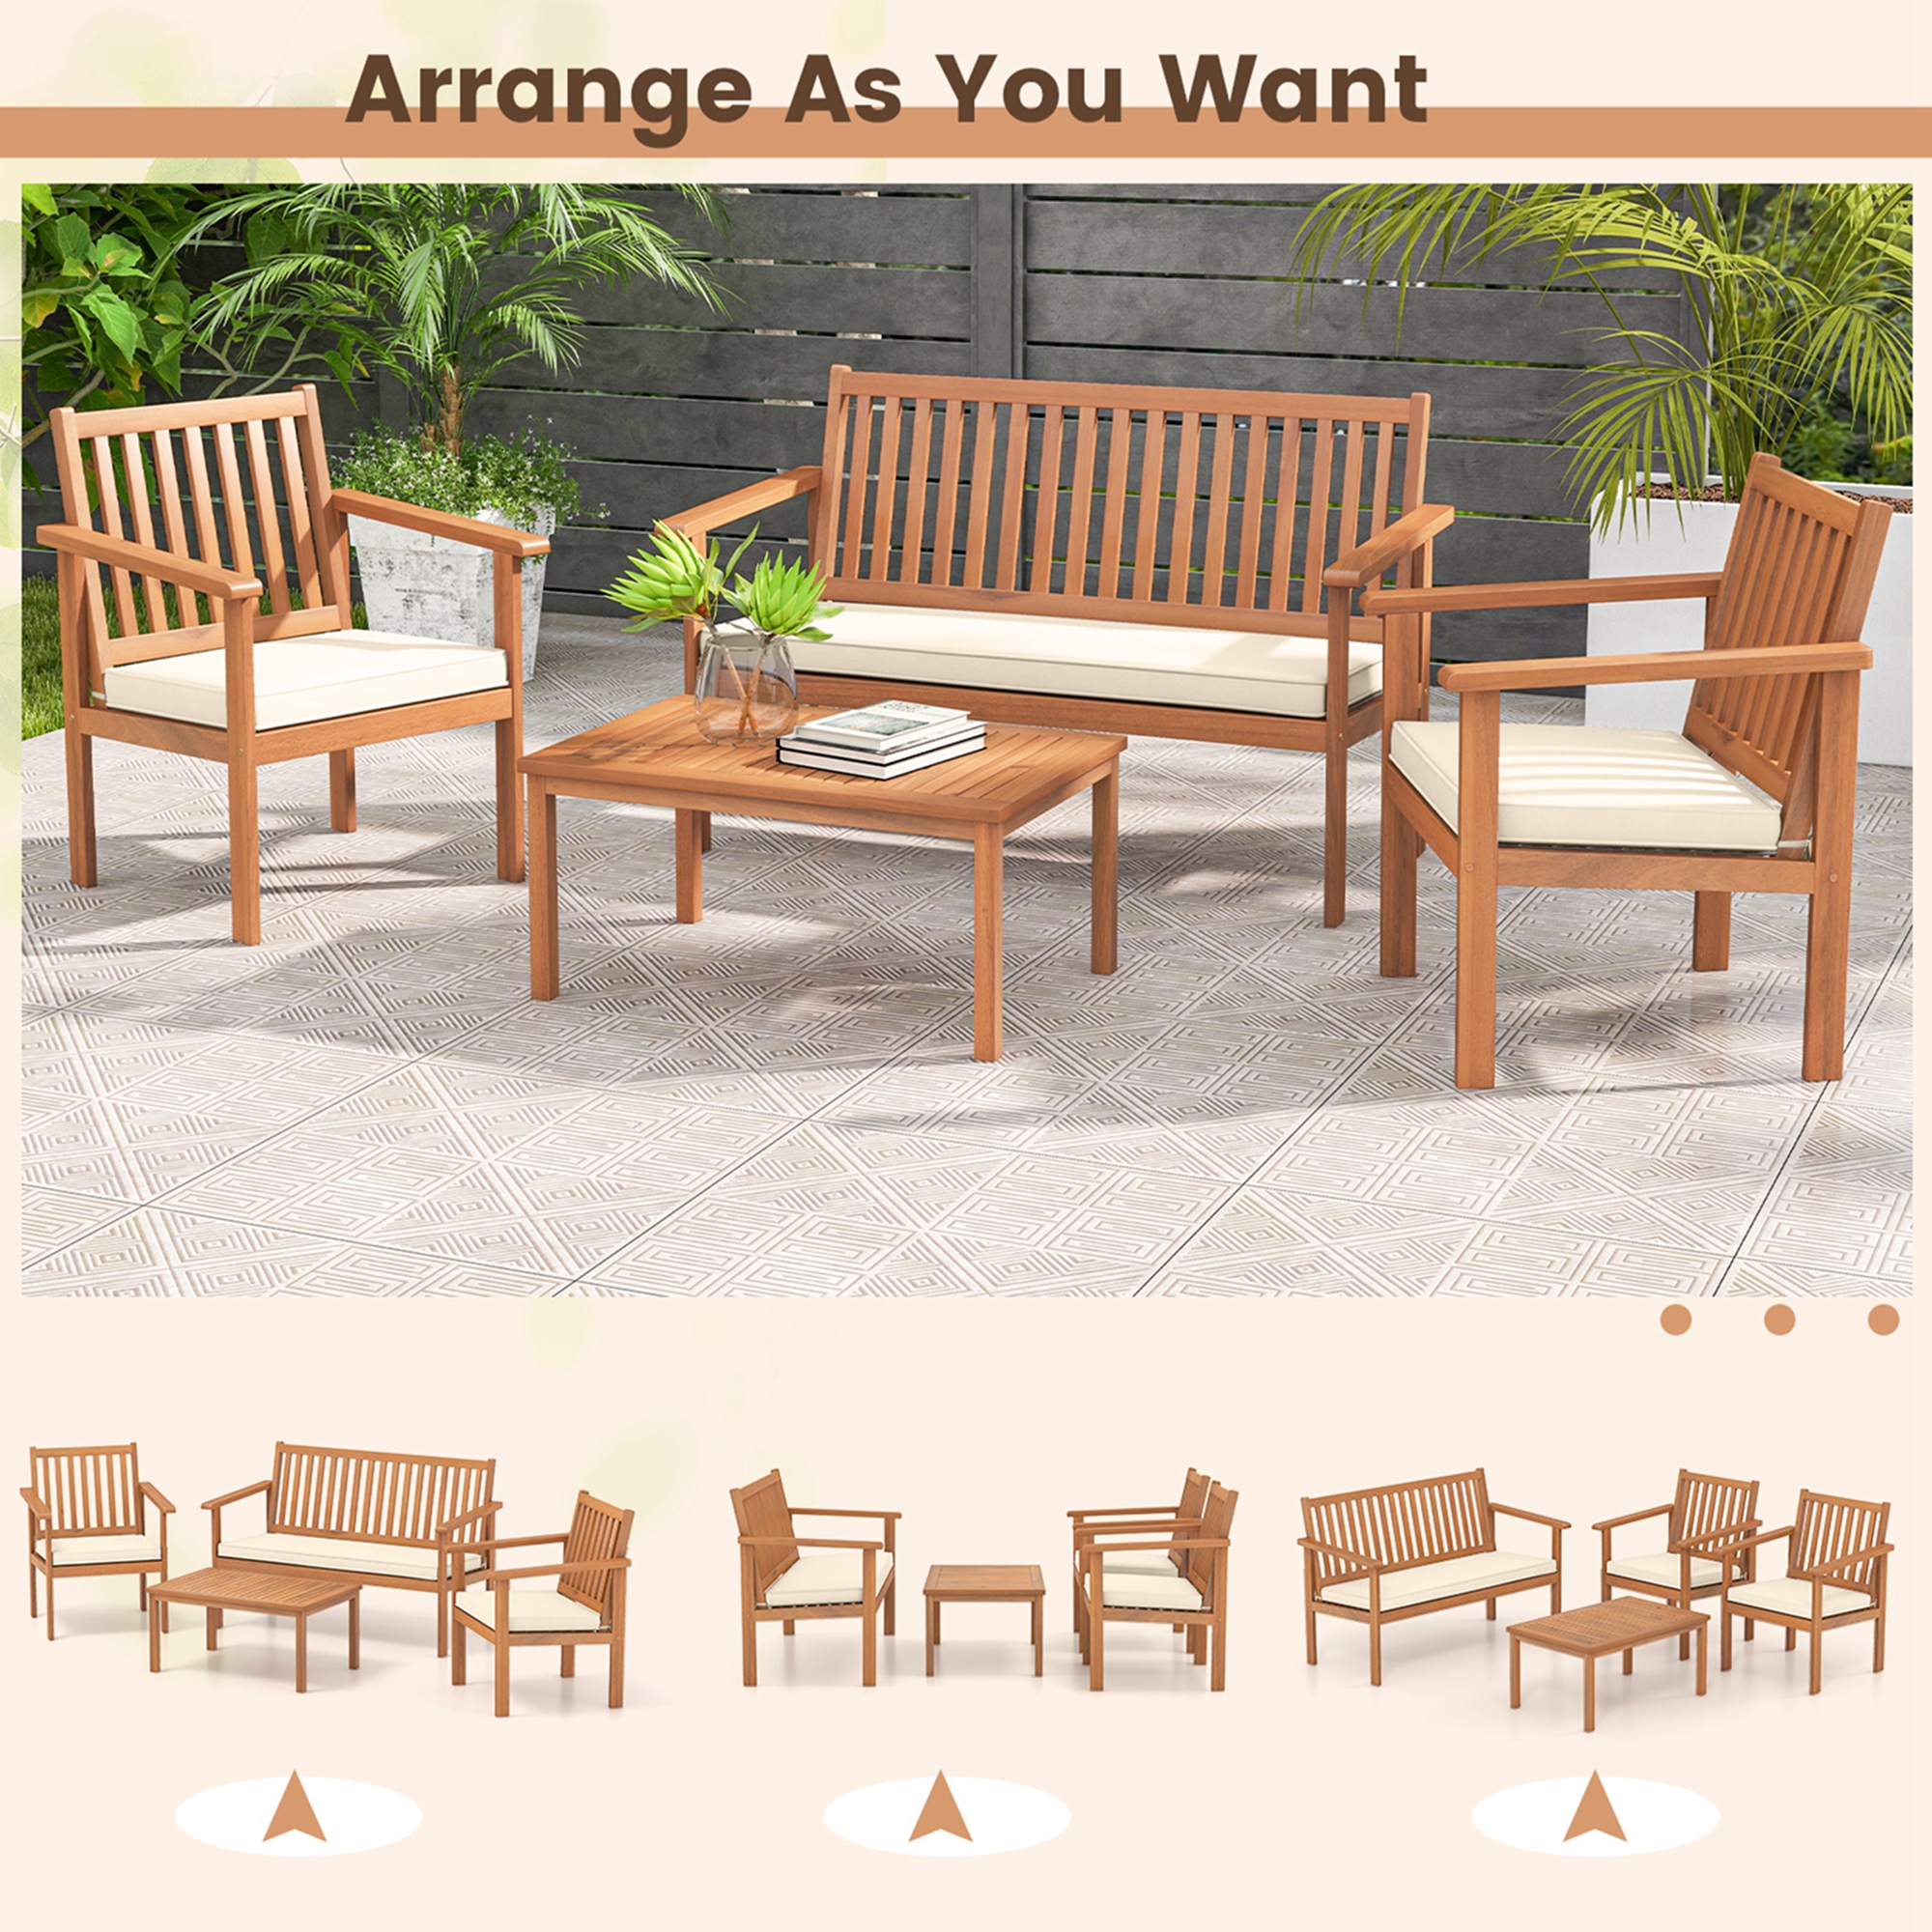 Costway 4 PCS Patio Wood Furniture Set with Loveseat, 2 Chairs & Coffee Table for Porch White - image 5 of 10